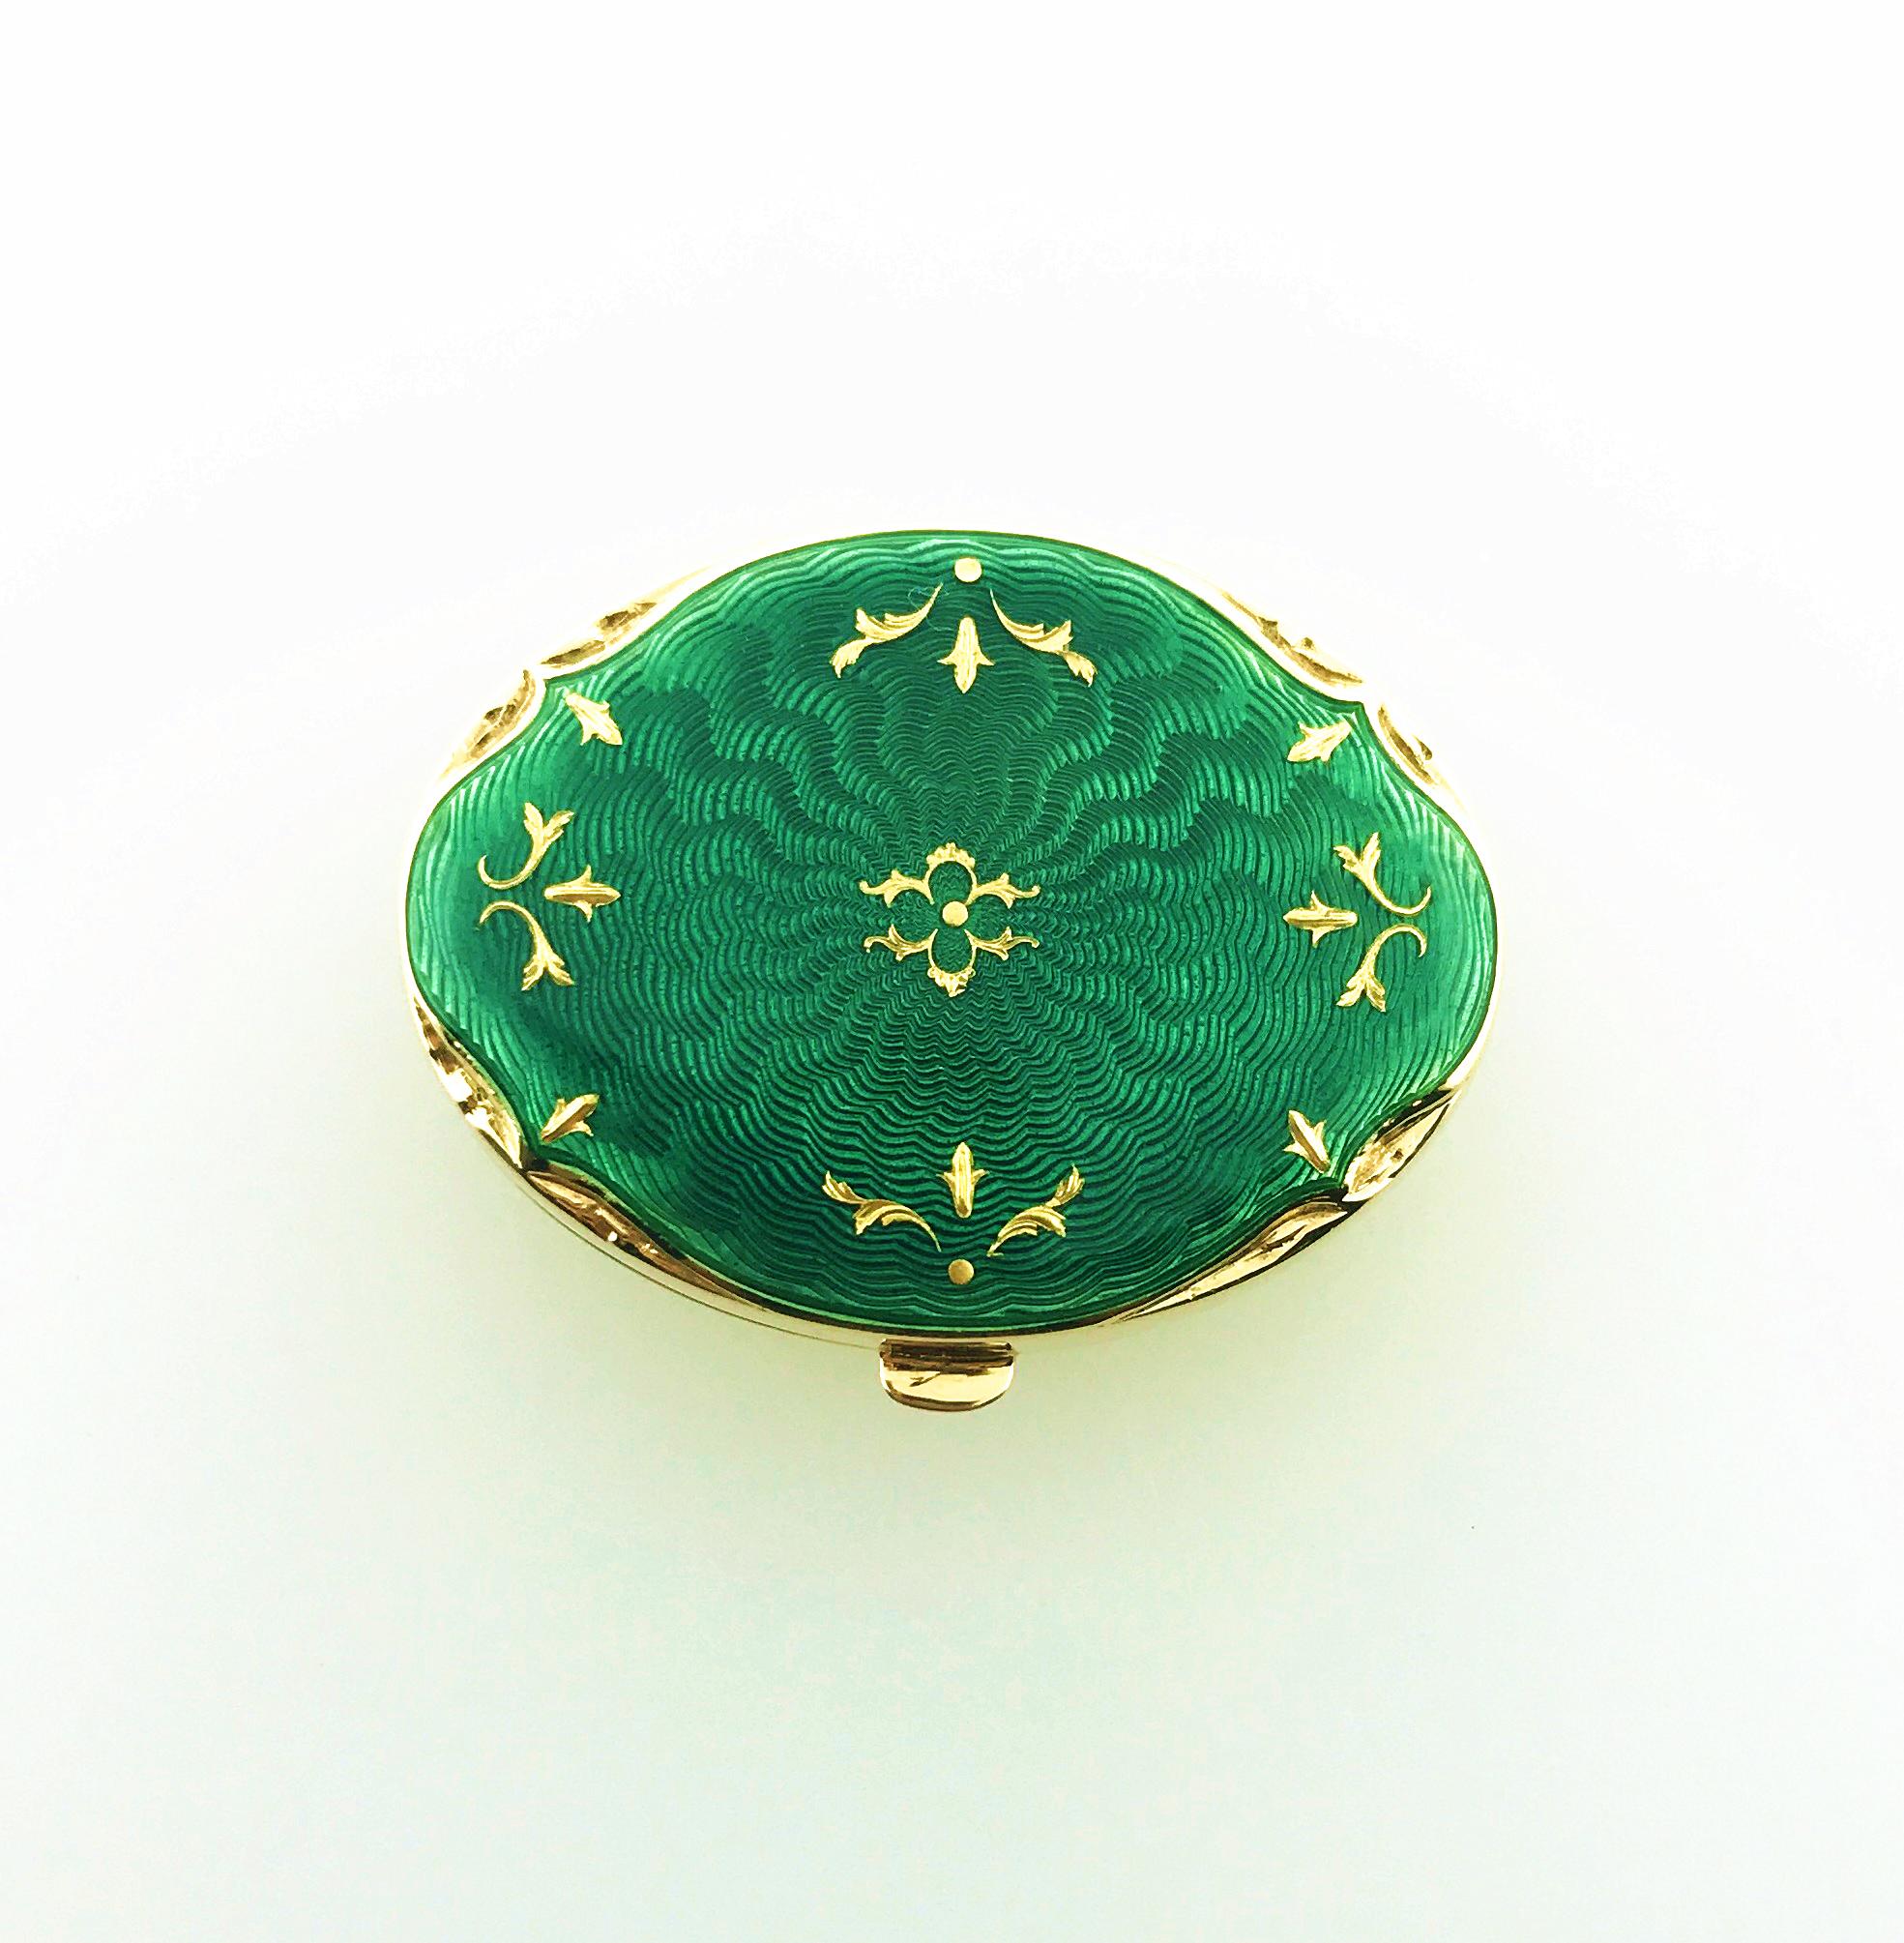 One Fabergé 18-karat yellow gold limited-edition French-guilloché, green enamel, oval-shaped pillbox. The box measures approximately 3.5 cm L x 2.6 cm W x 1.0 cm D and has a hinged emerald-green enameled top embellished with 24-Karat handmade yellow